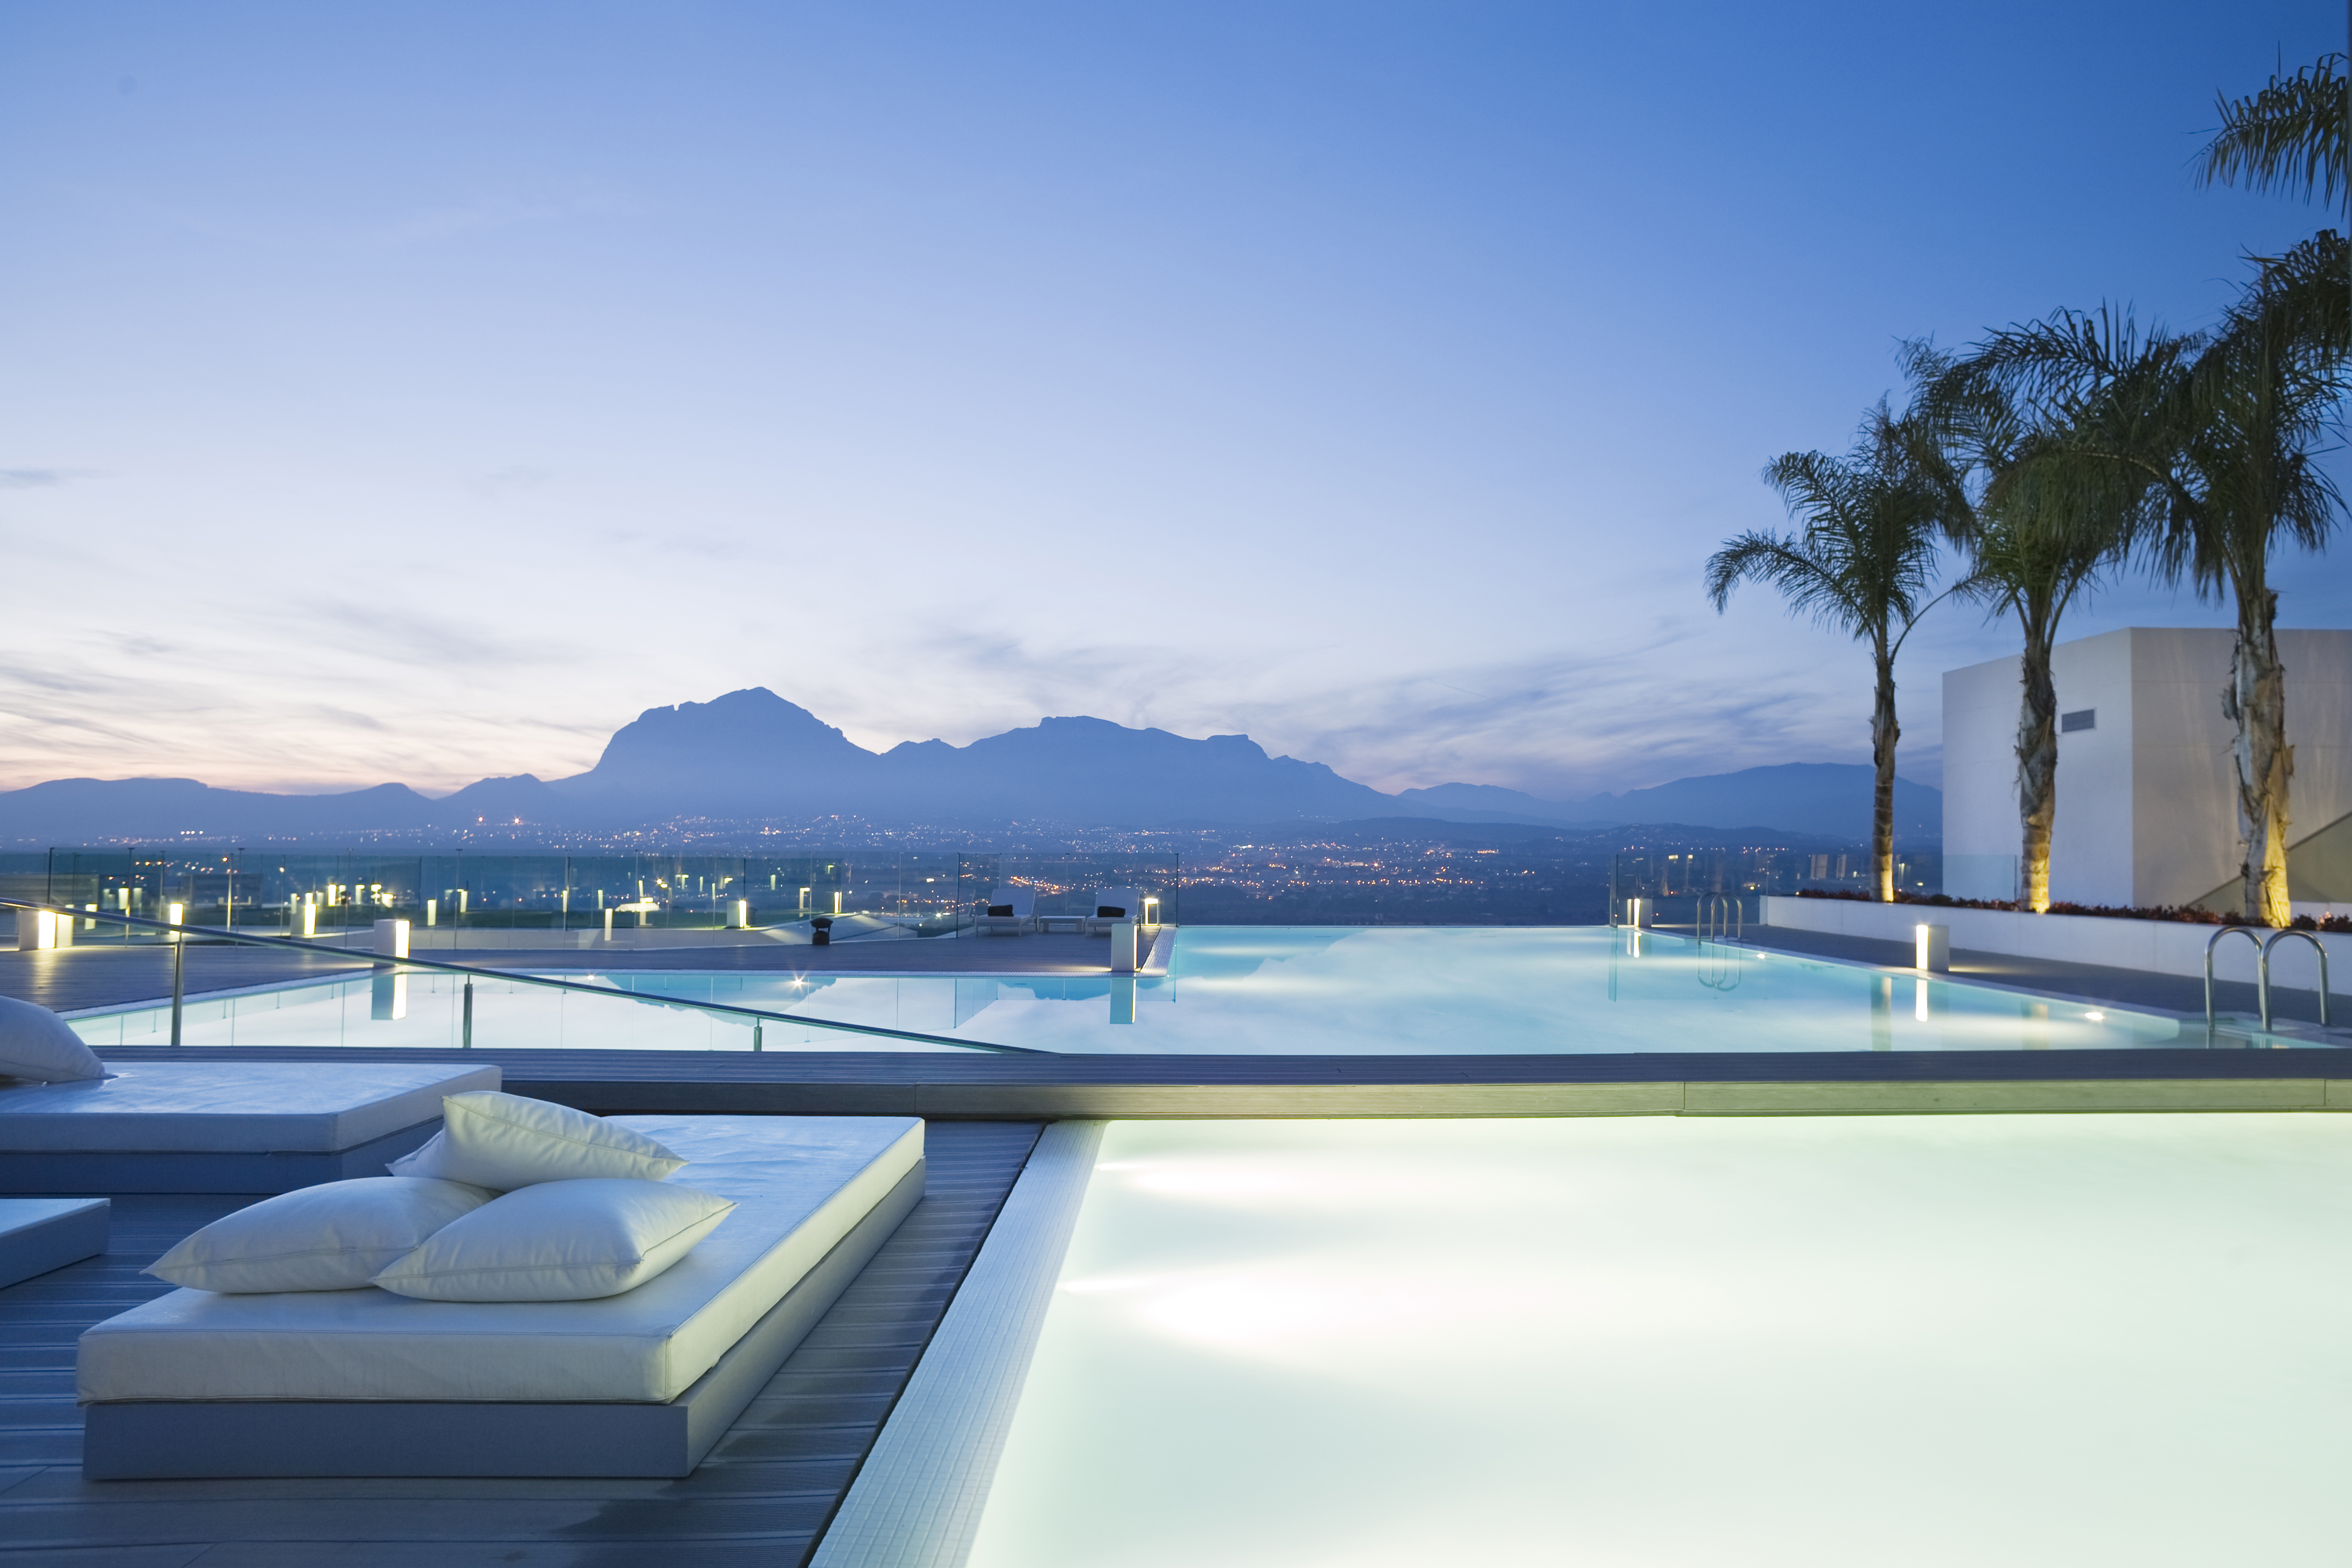 General 4368x2912 swimming pool mountains palm trees sky modern